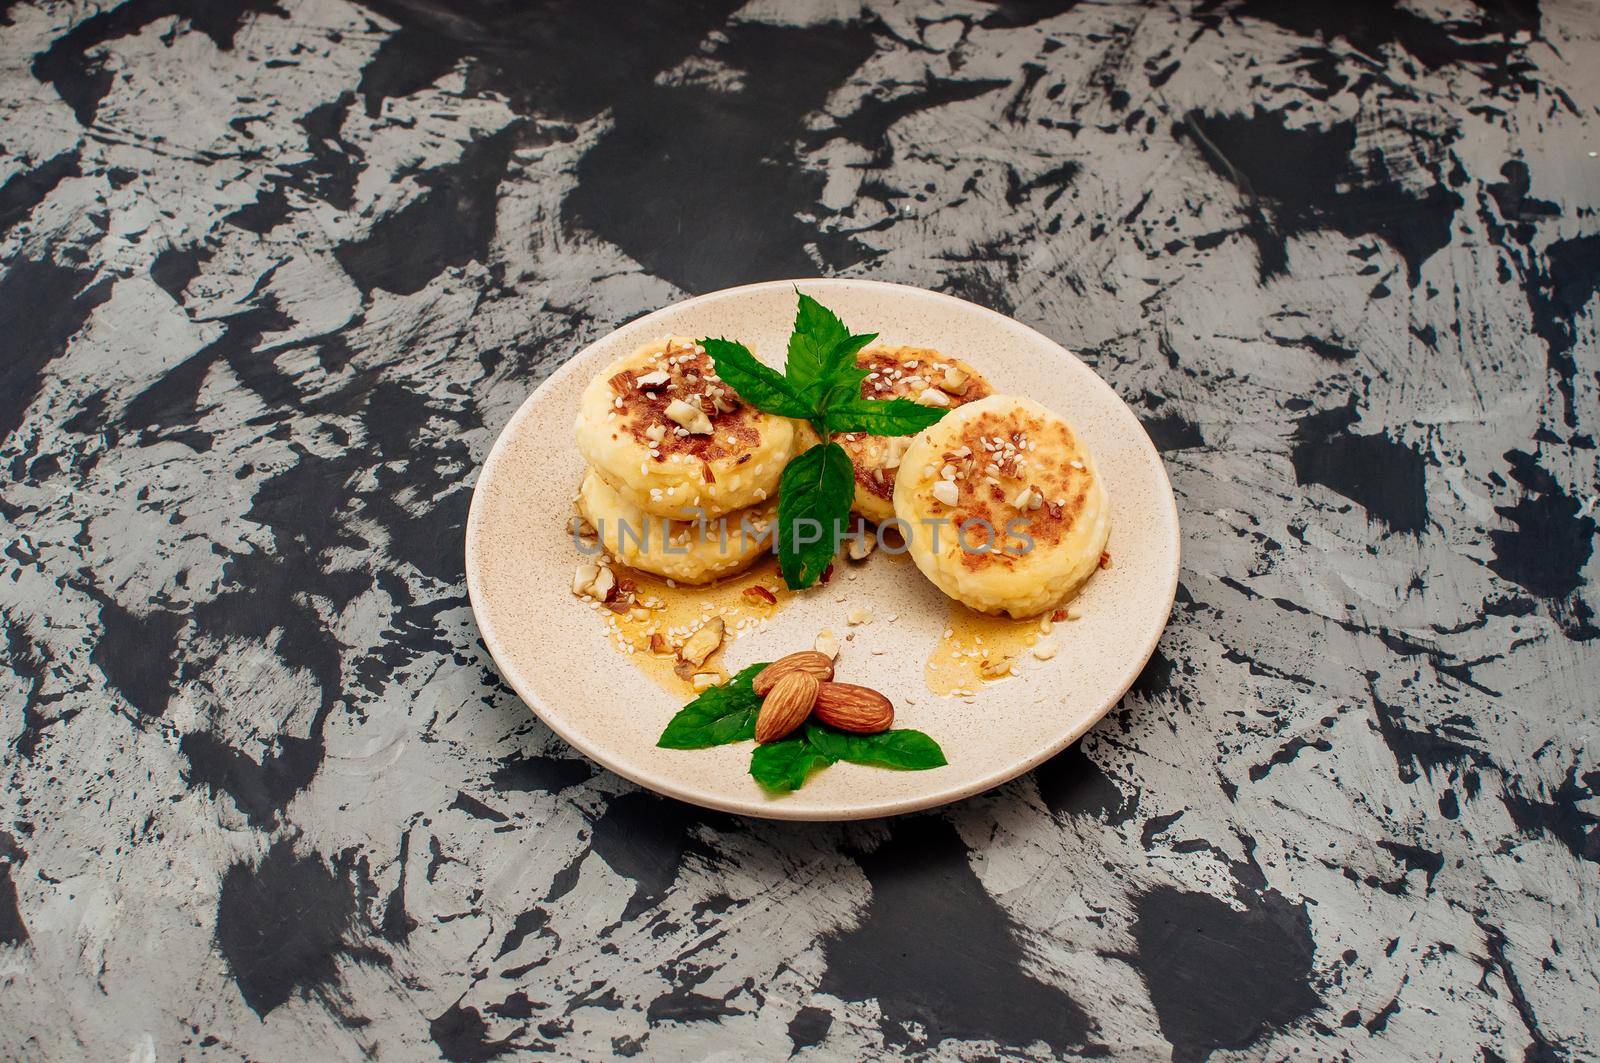 Cheesecakes, cottage cheese pancakes with almonds, fresh mint and maple syrup on a gray background from a concrete table. Cheesecakes, homemade traditional Ukrainian and Russian cheesecakes